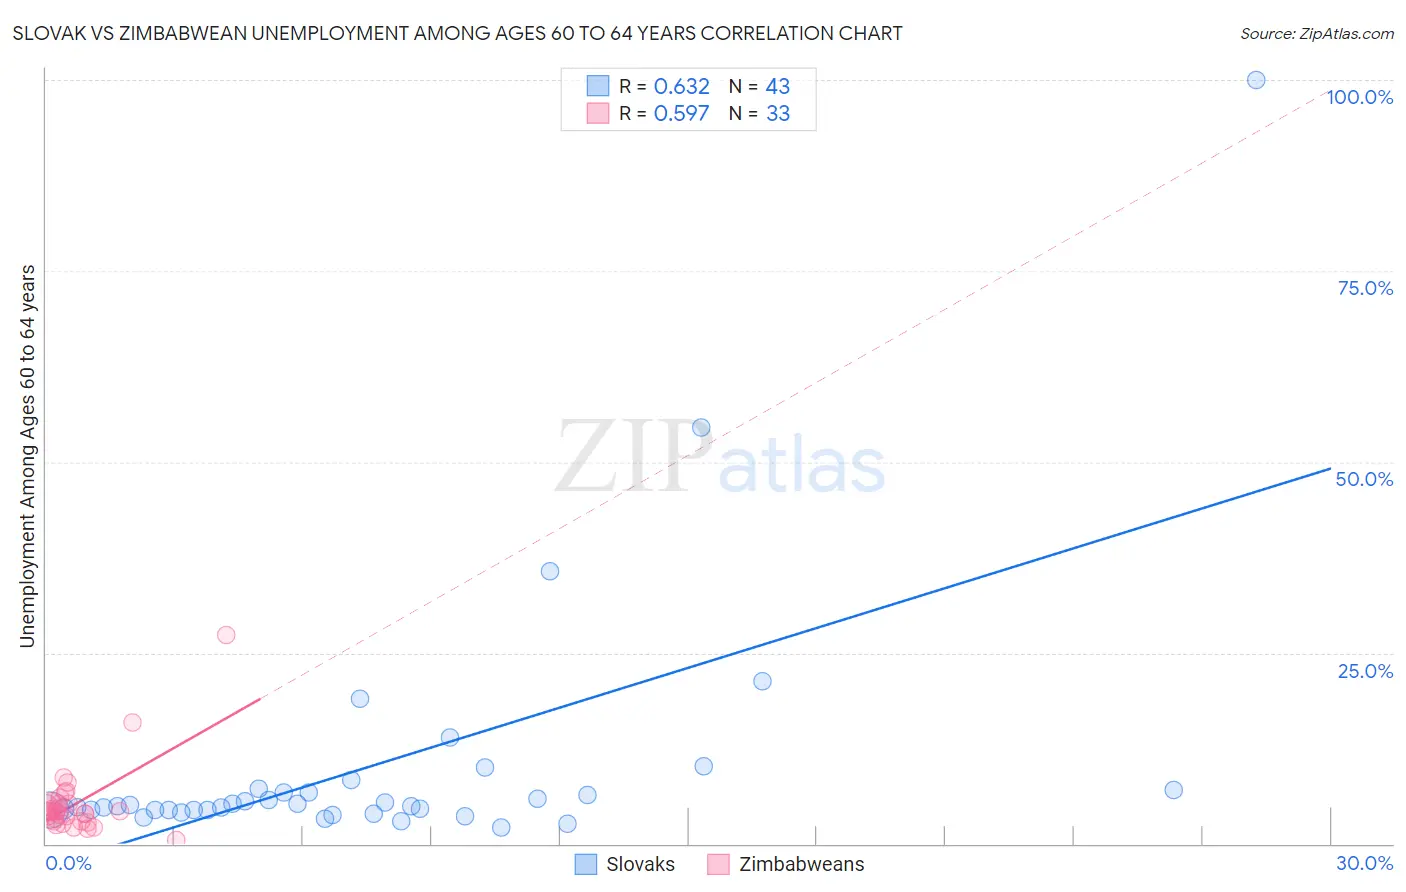 Slovak vs Zimbabwean Unemployment Among Ages 60 to 64 years